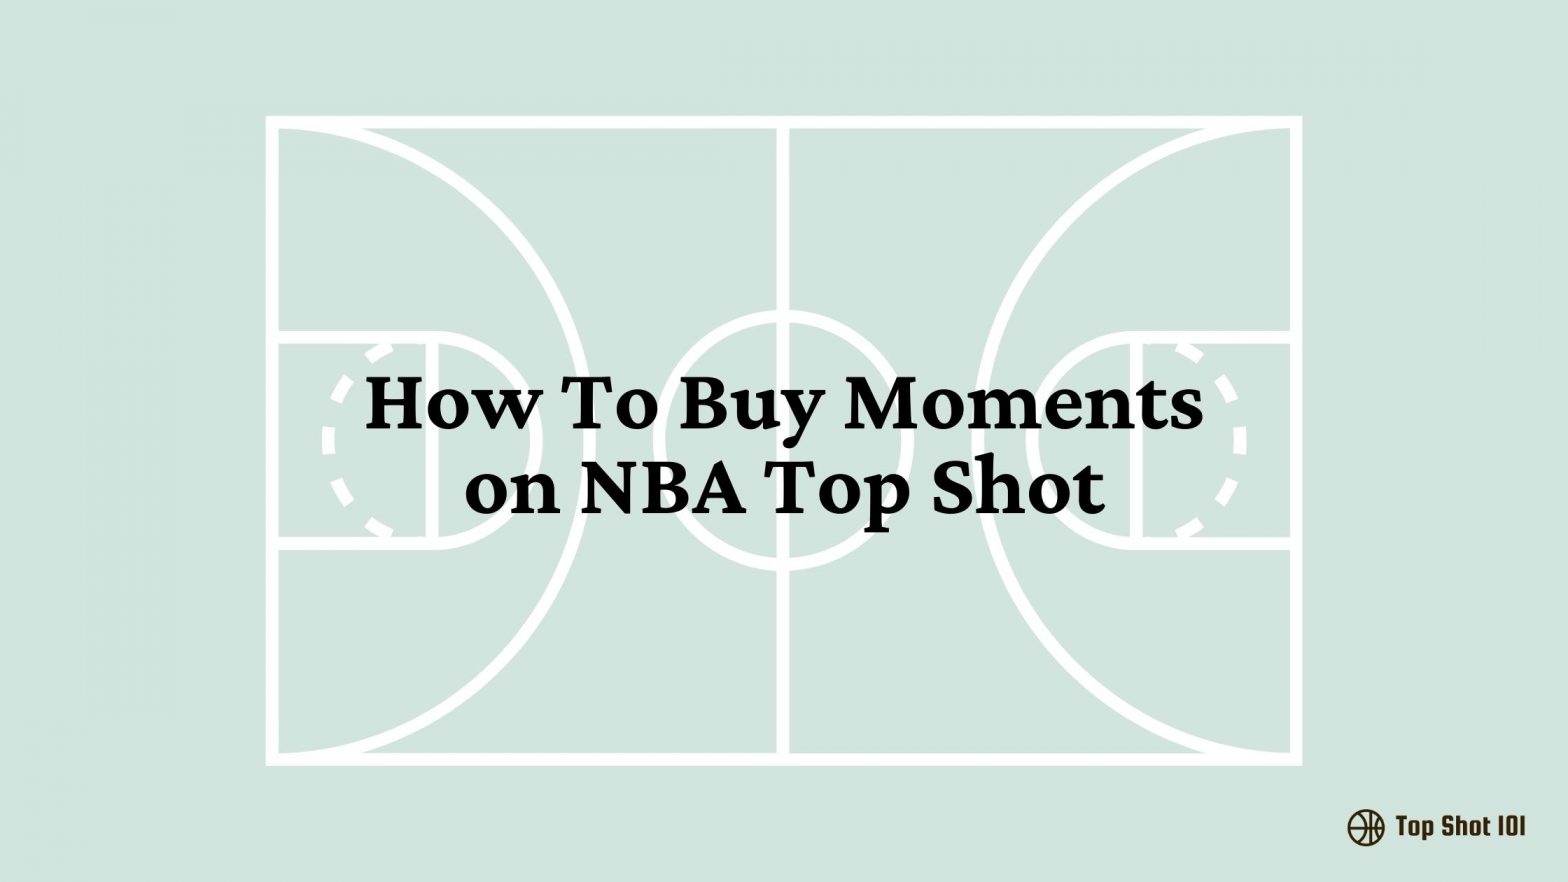 How To Buy Moments on NBA Top Shot